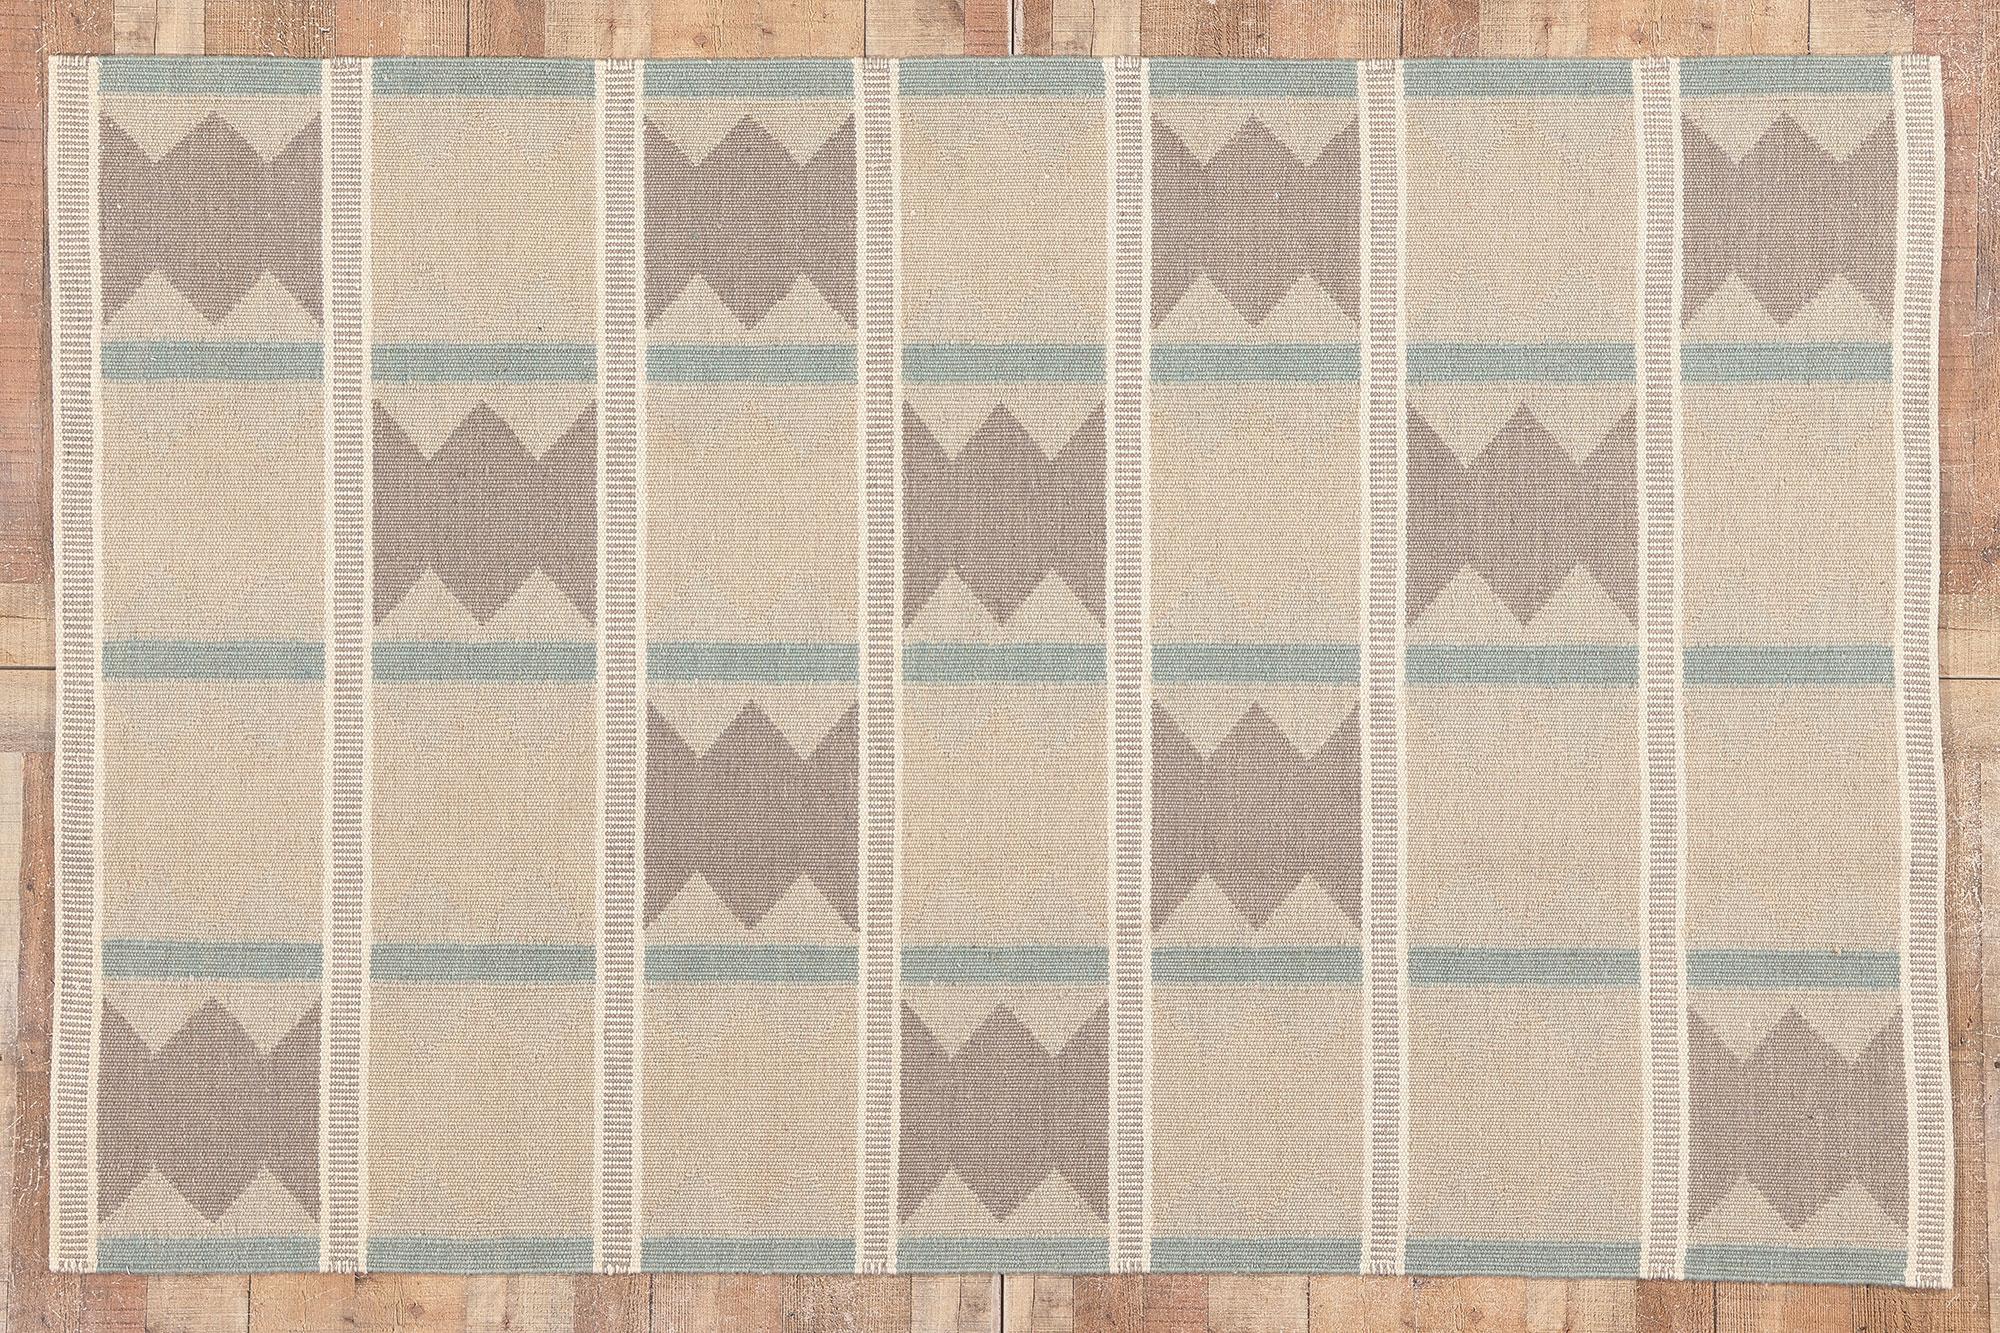 Contemporary Ingegerd Silow Swedish Inspired Kilim Rug, Scandi Style Meets Sublime Simplicity For Sale